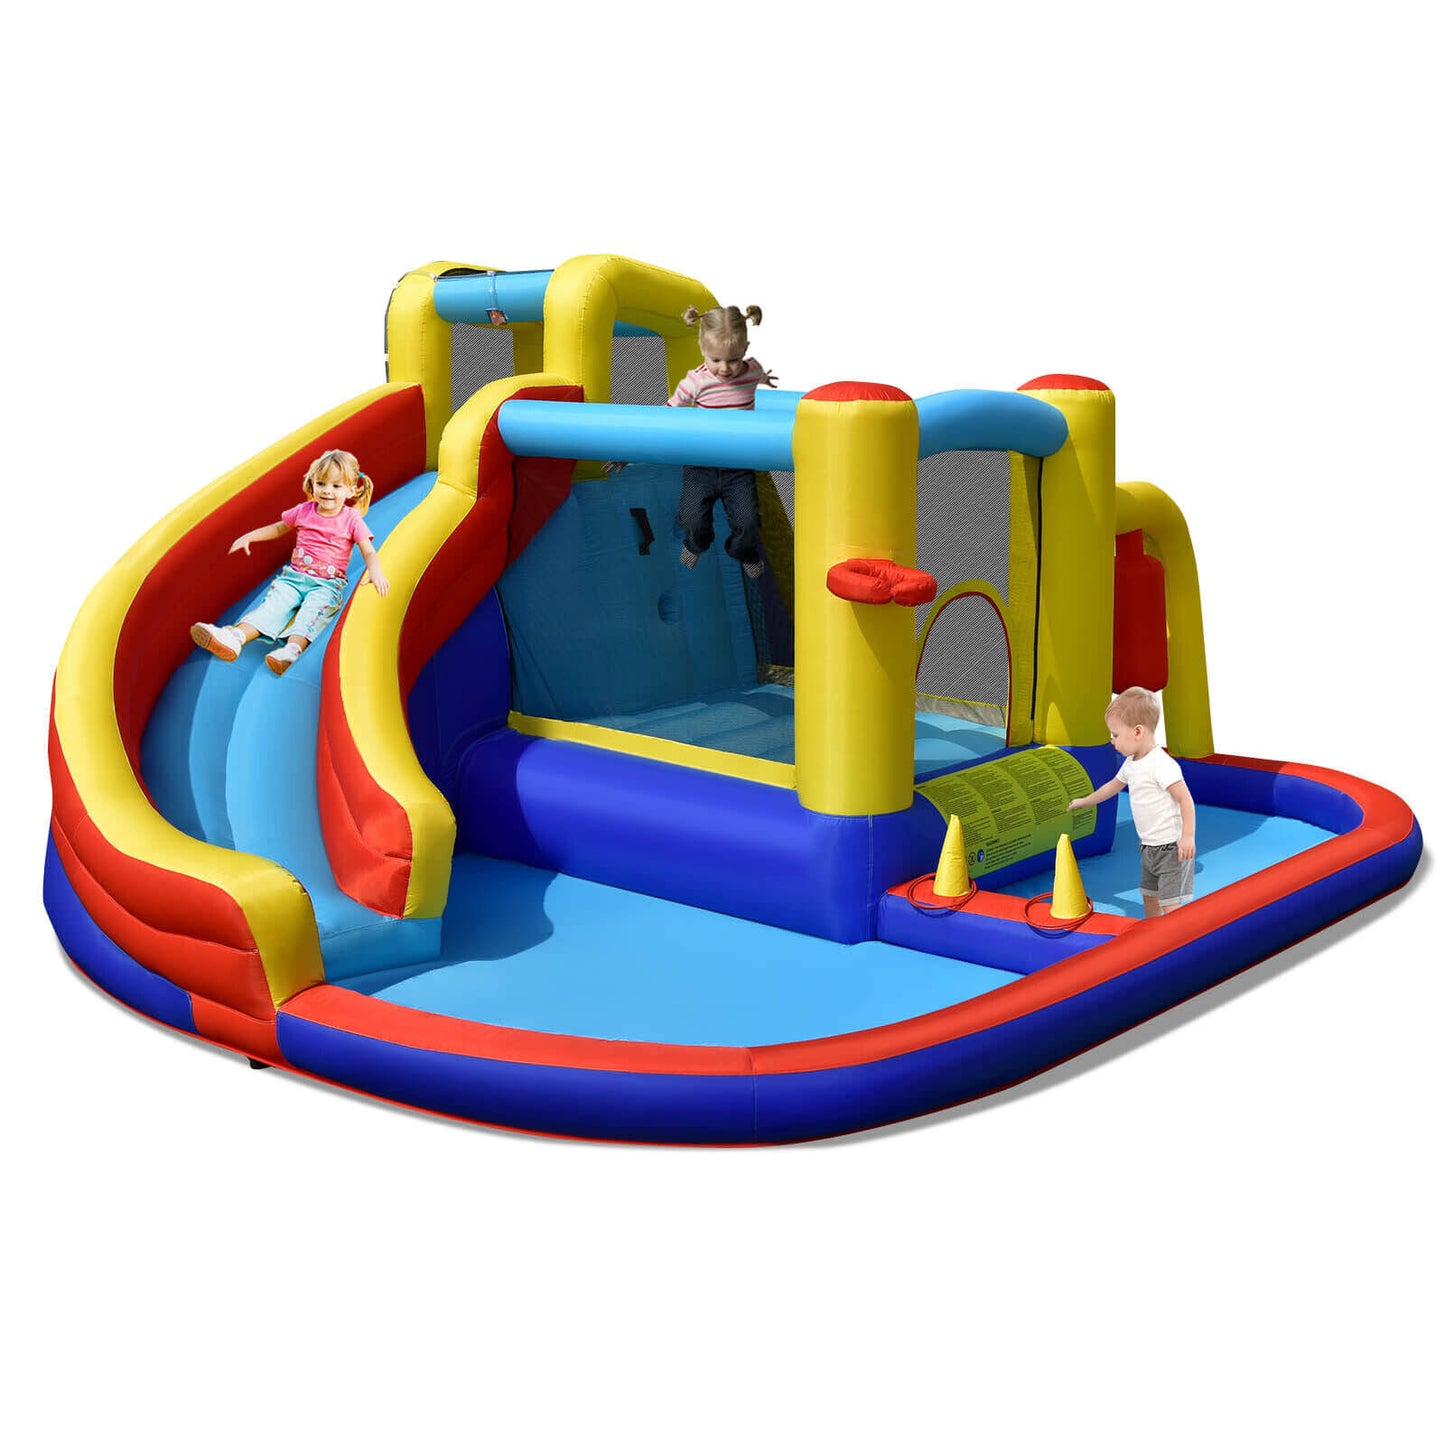 7-in-1 Inflatable Water Slide Bounce Castle with Splash Pool and Climbing Wall without Blower - Gallery Canada